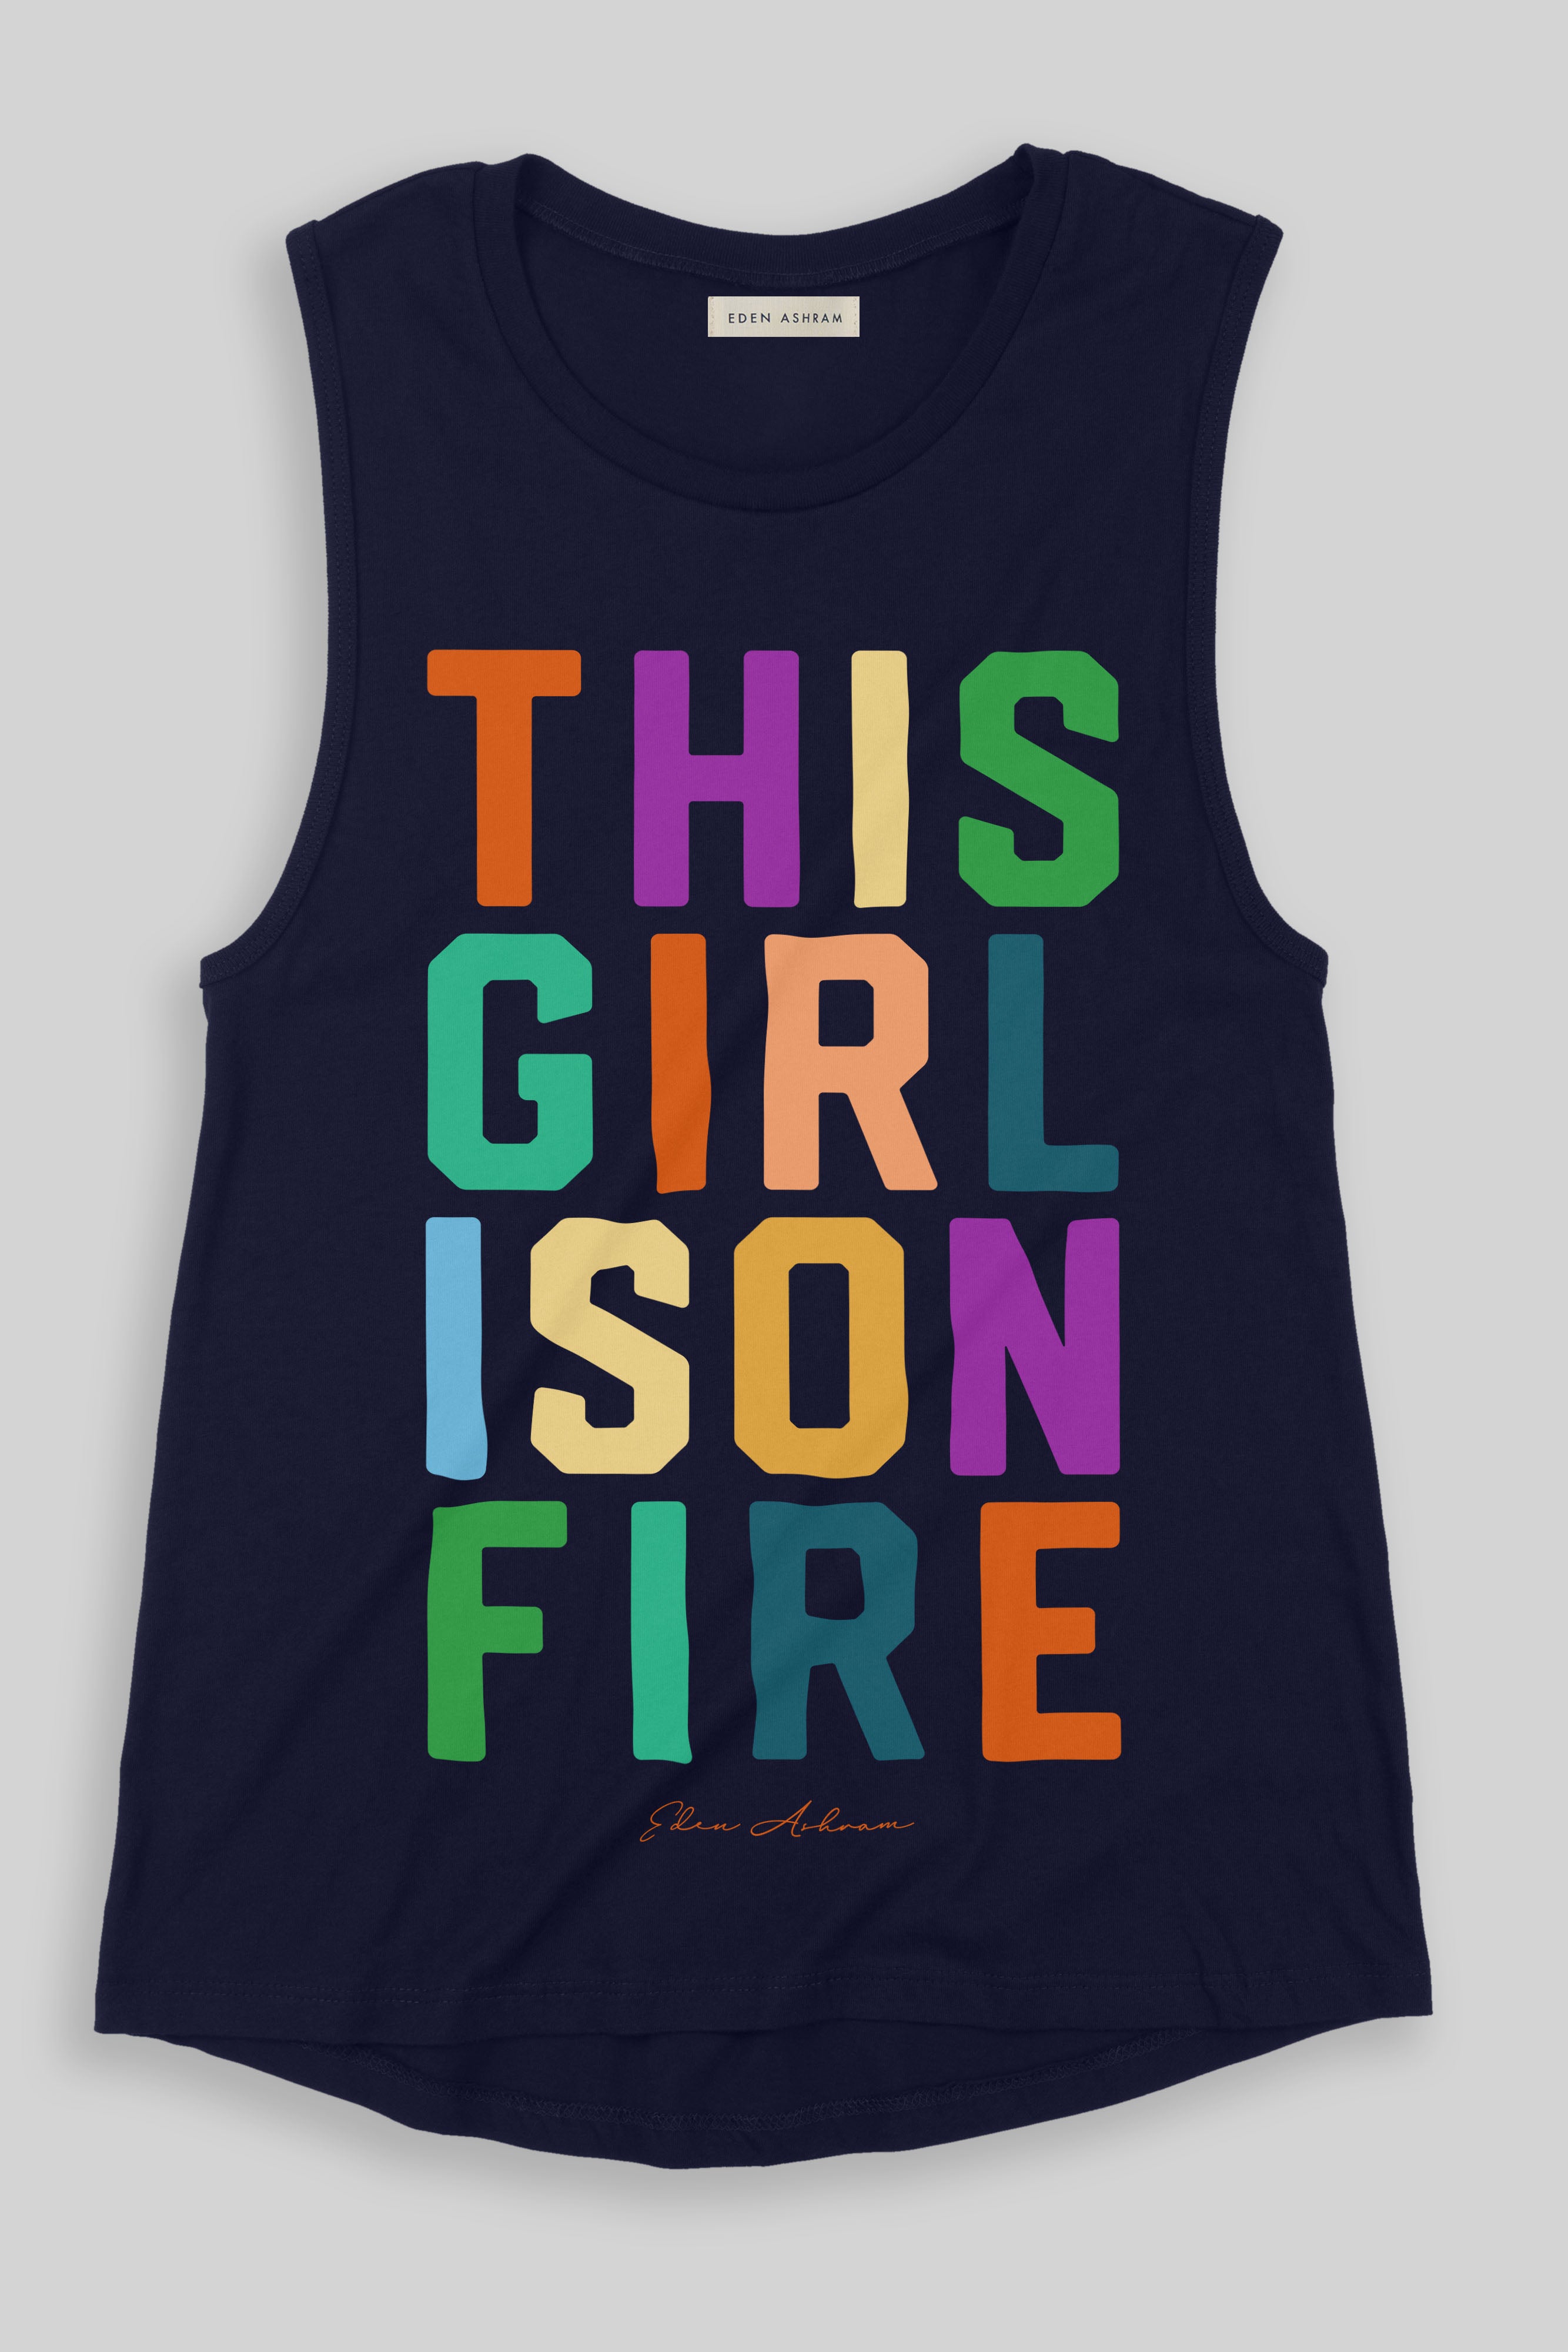 EDEN ASHRAM This Girl Is On Fire Premium Jersey Muscle Tank Navy